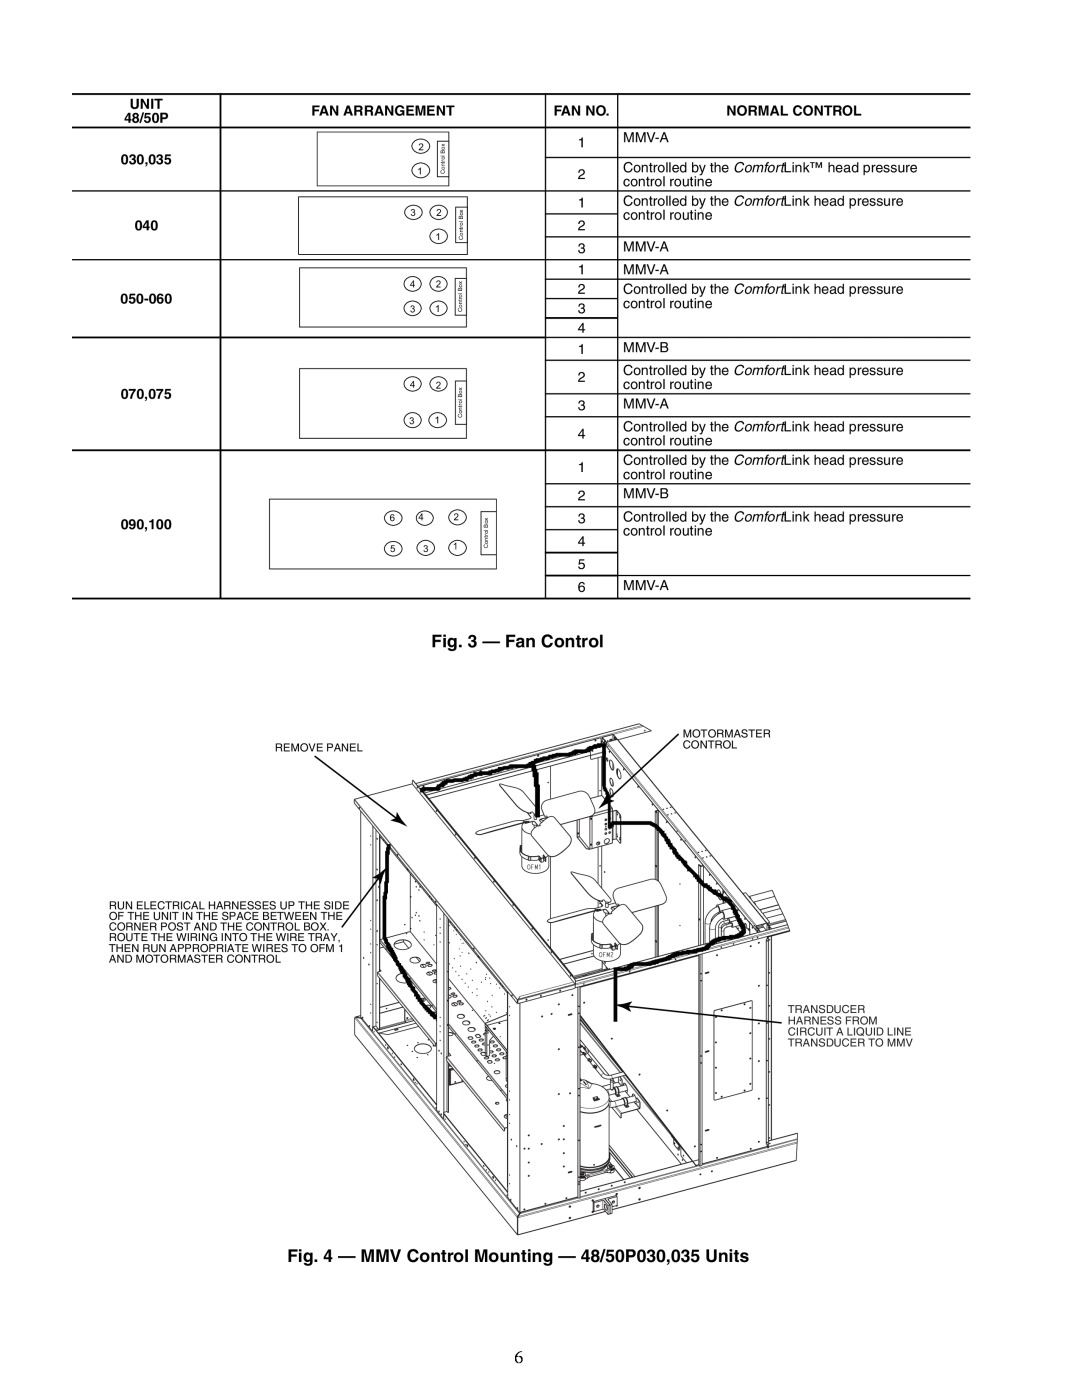 Carrier 48/50P3, 48/50P4, 48/50P2, 48/50P5030-100 installation instructions a48-8562, Fan Control 